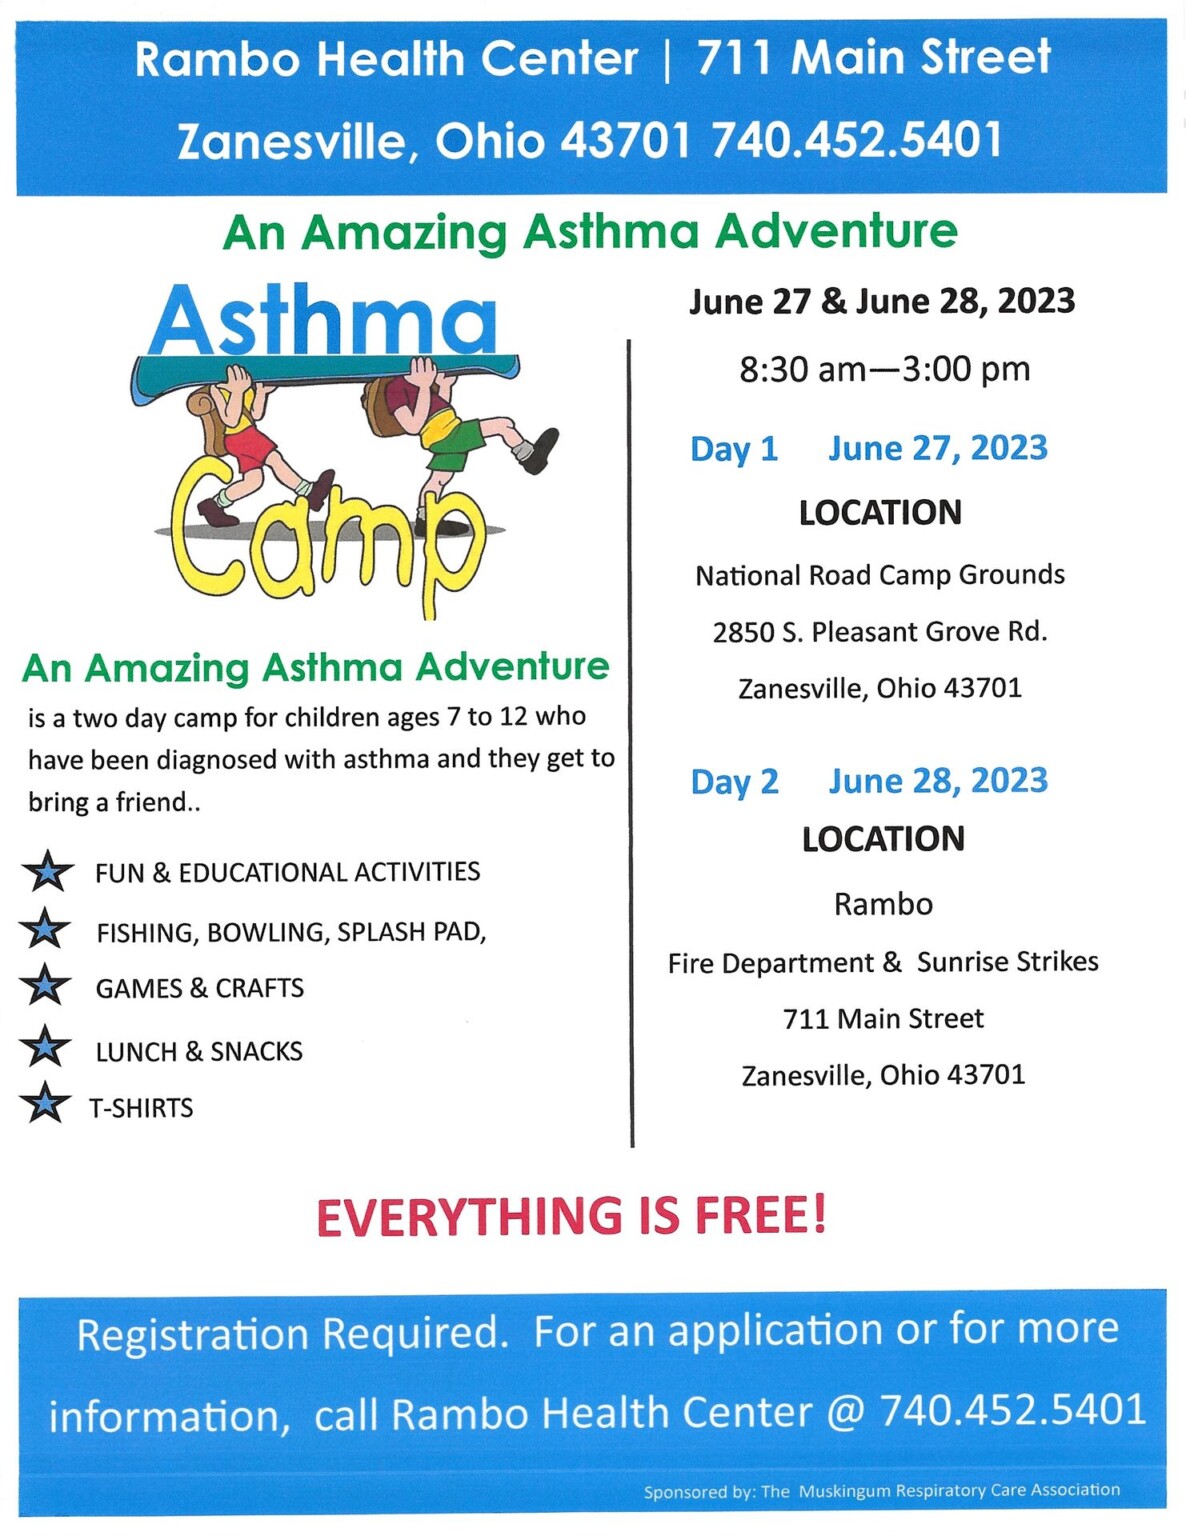 Asthma Camp for Kids WHIZ Fox 5 / Marquee Broadcasting